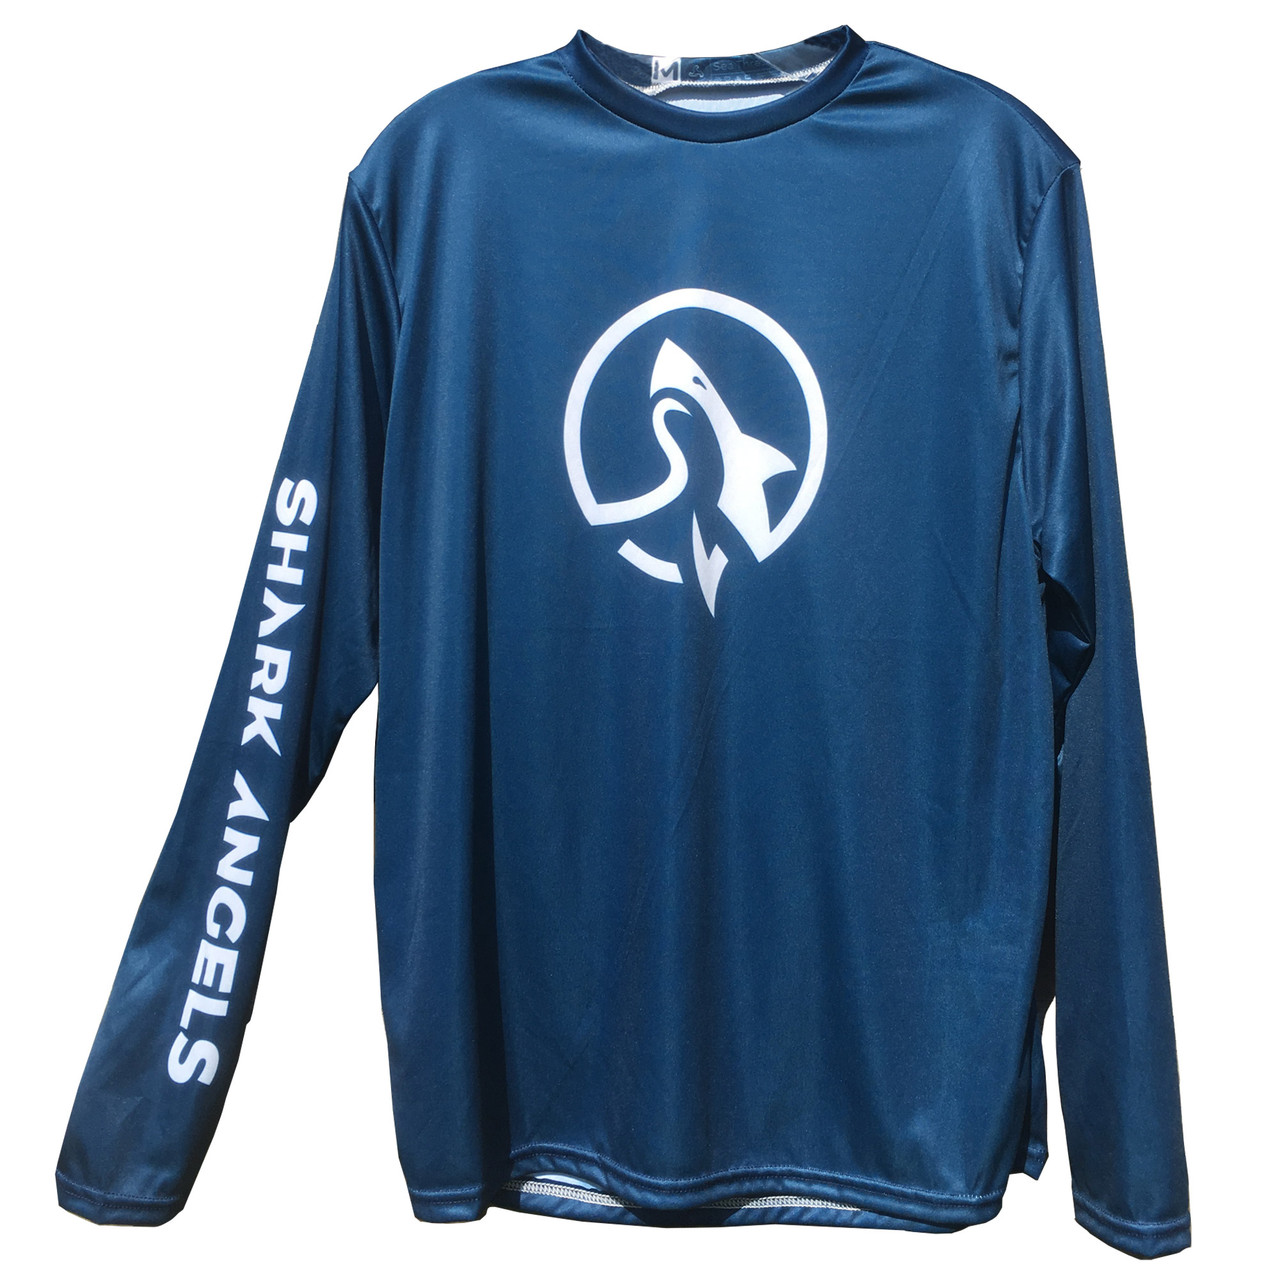 UNISEX UPF 50+ RECYCLED PLASTIC RELAXED FIT RASH GUARD